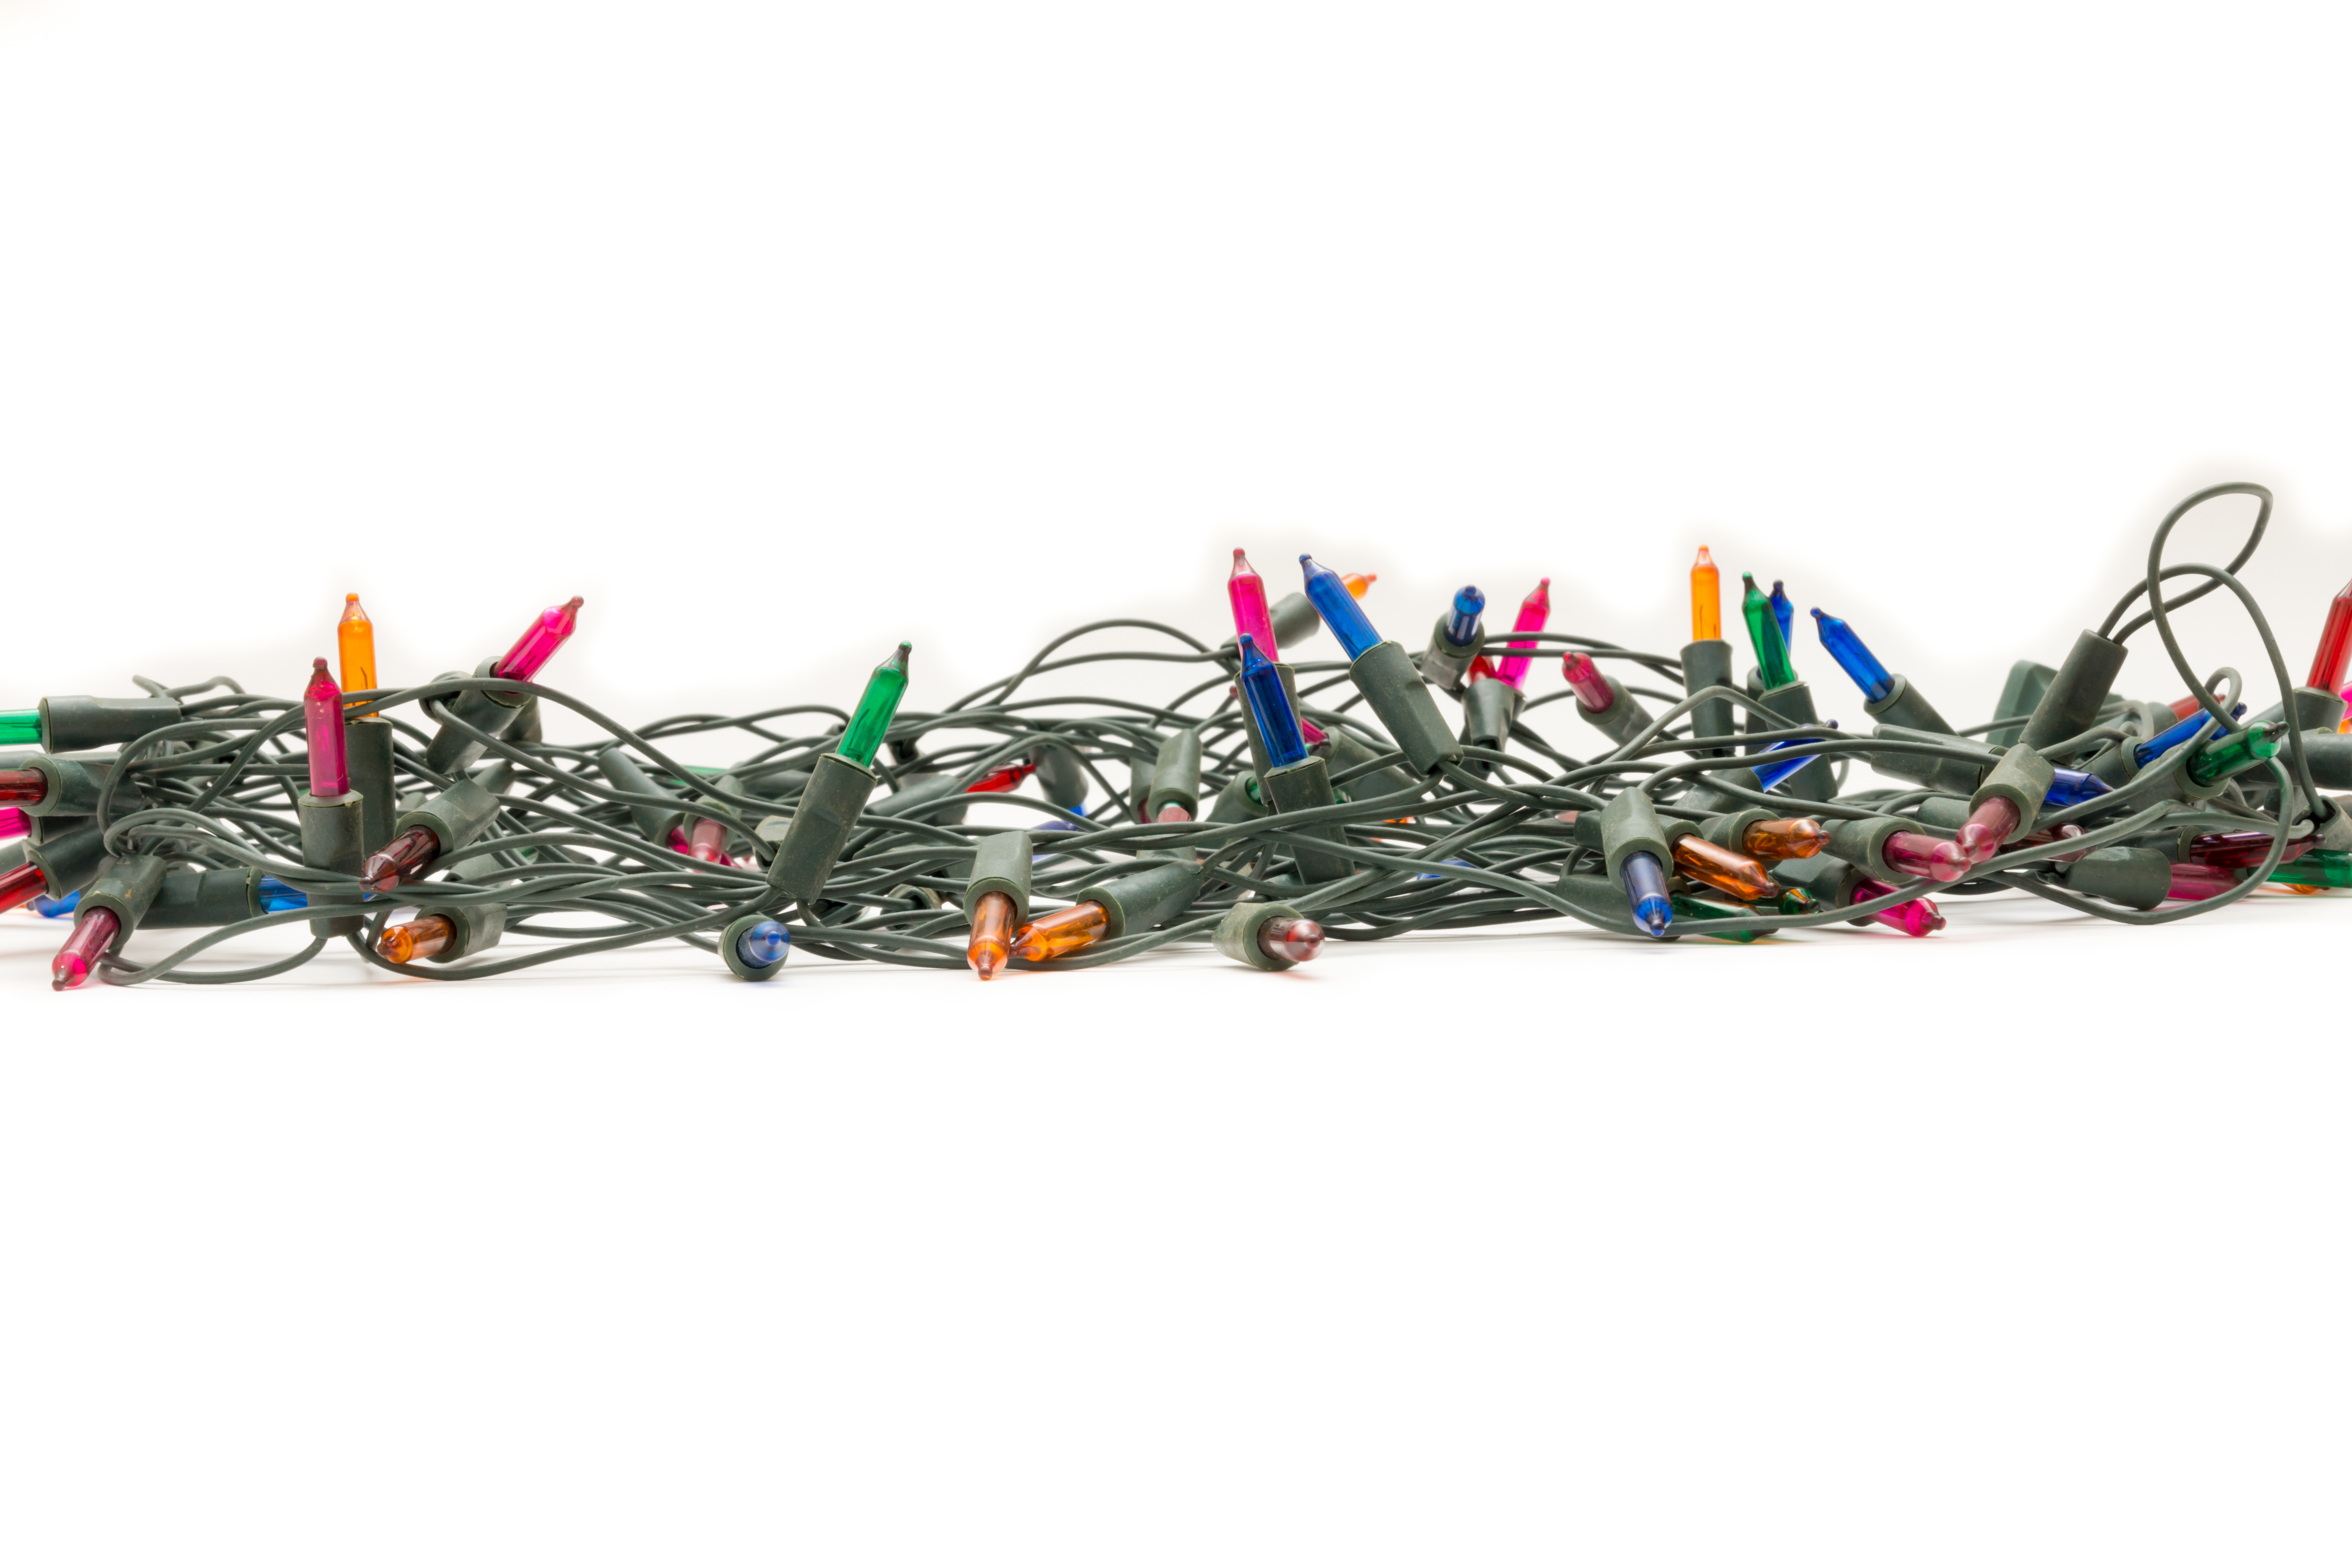 We’re Collecting Old Holiday Lights For Donation or Recycling